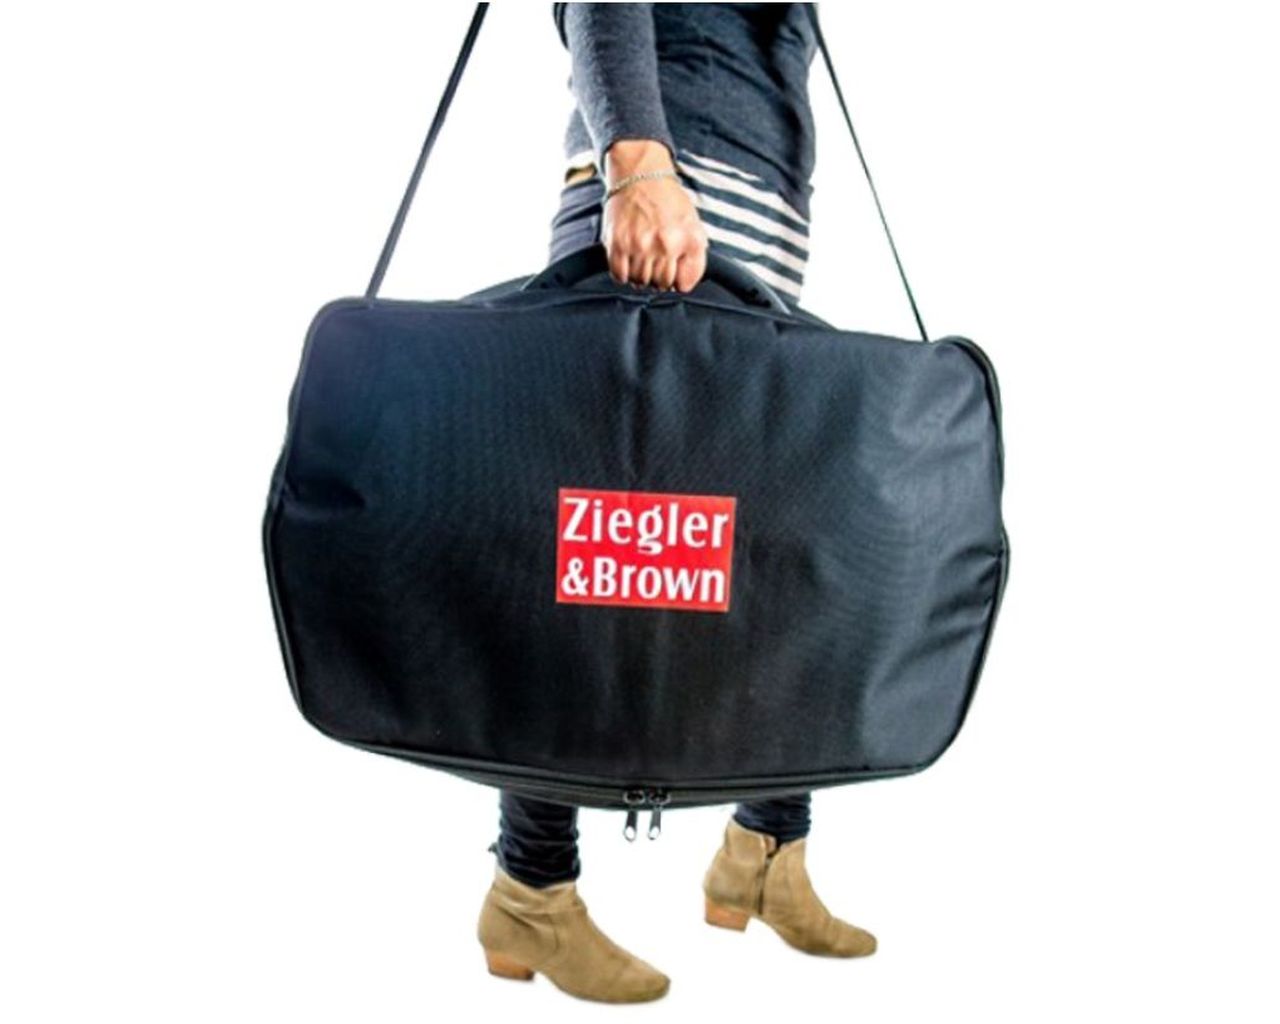 Ziegler & Brown Carry Bag - Portable Grill, , hi-res image number null